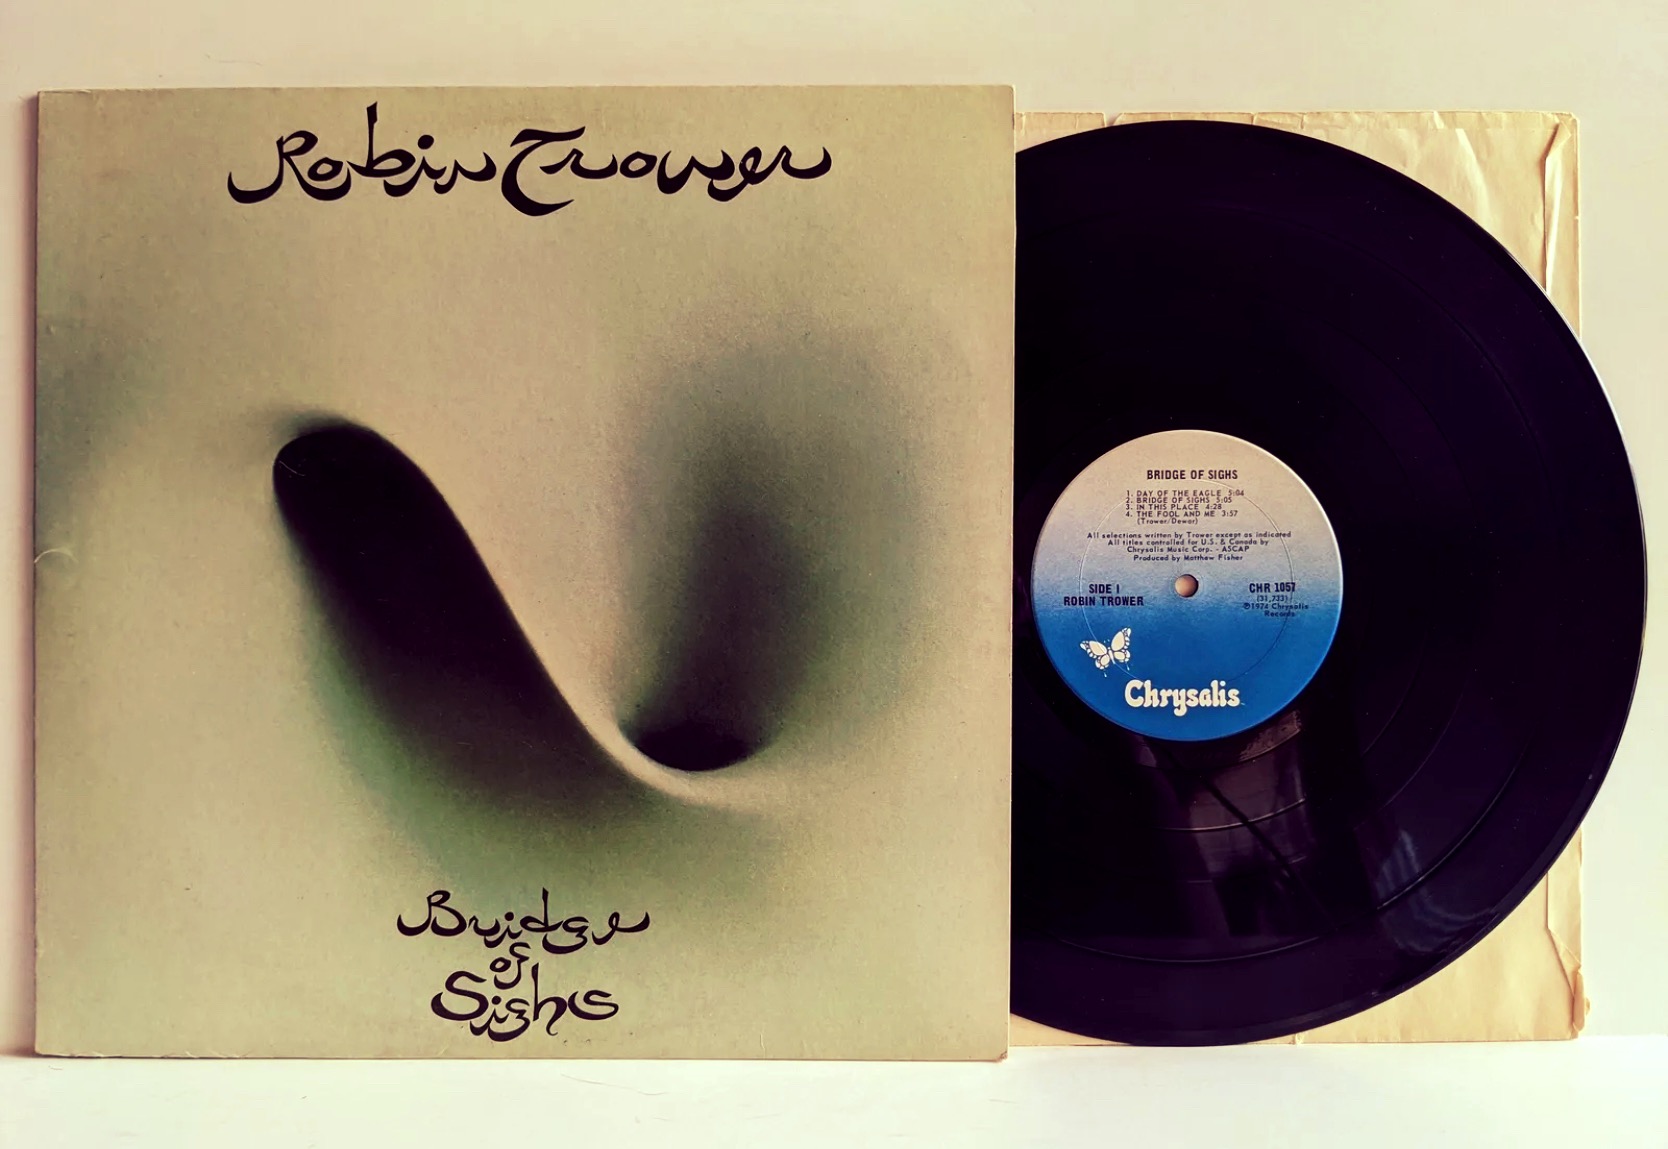 Bridge of Sighs: A Timeless Masterpiece by Robin Trower